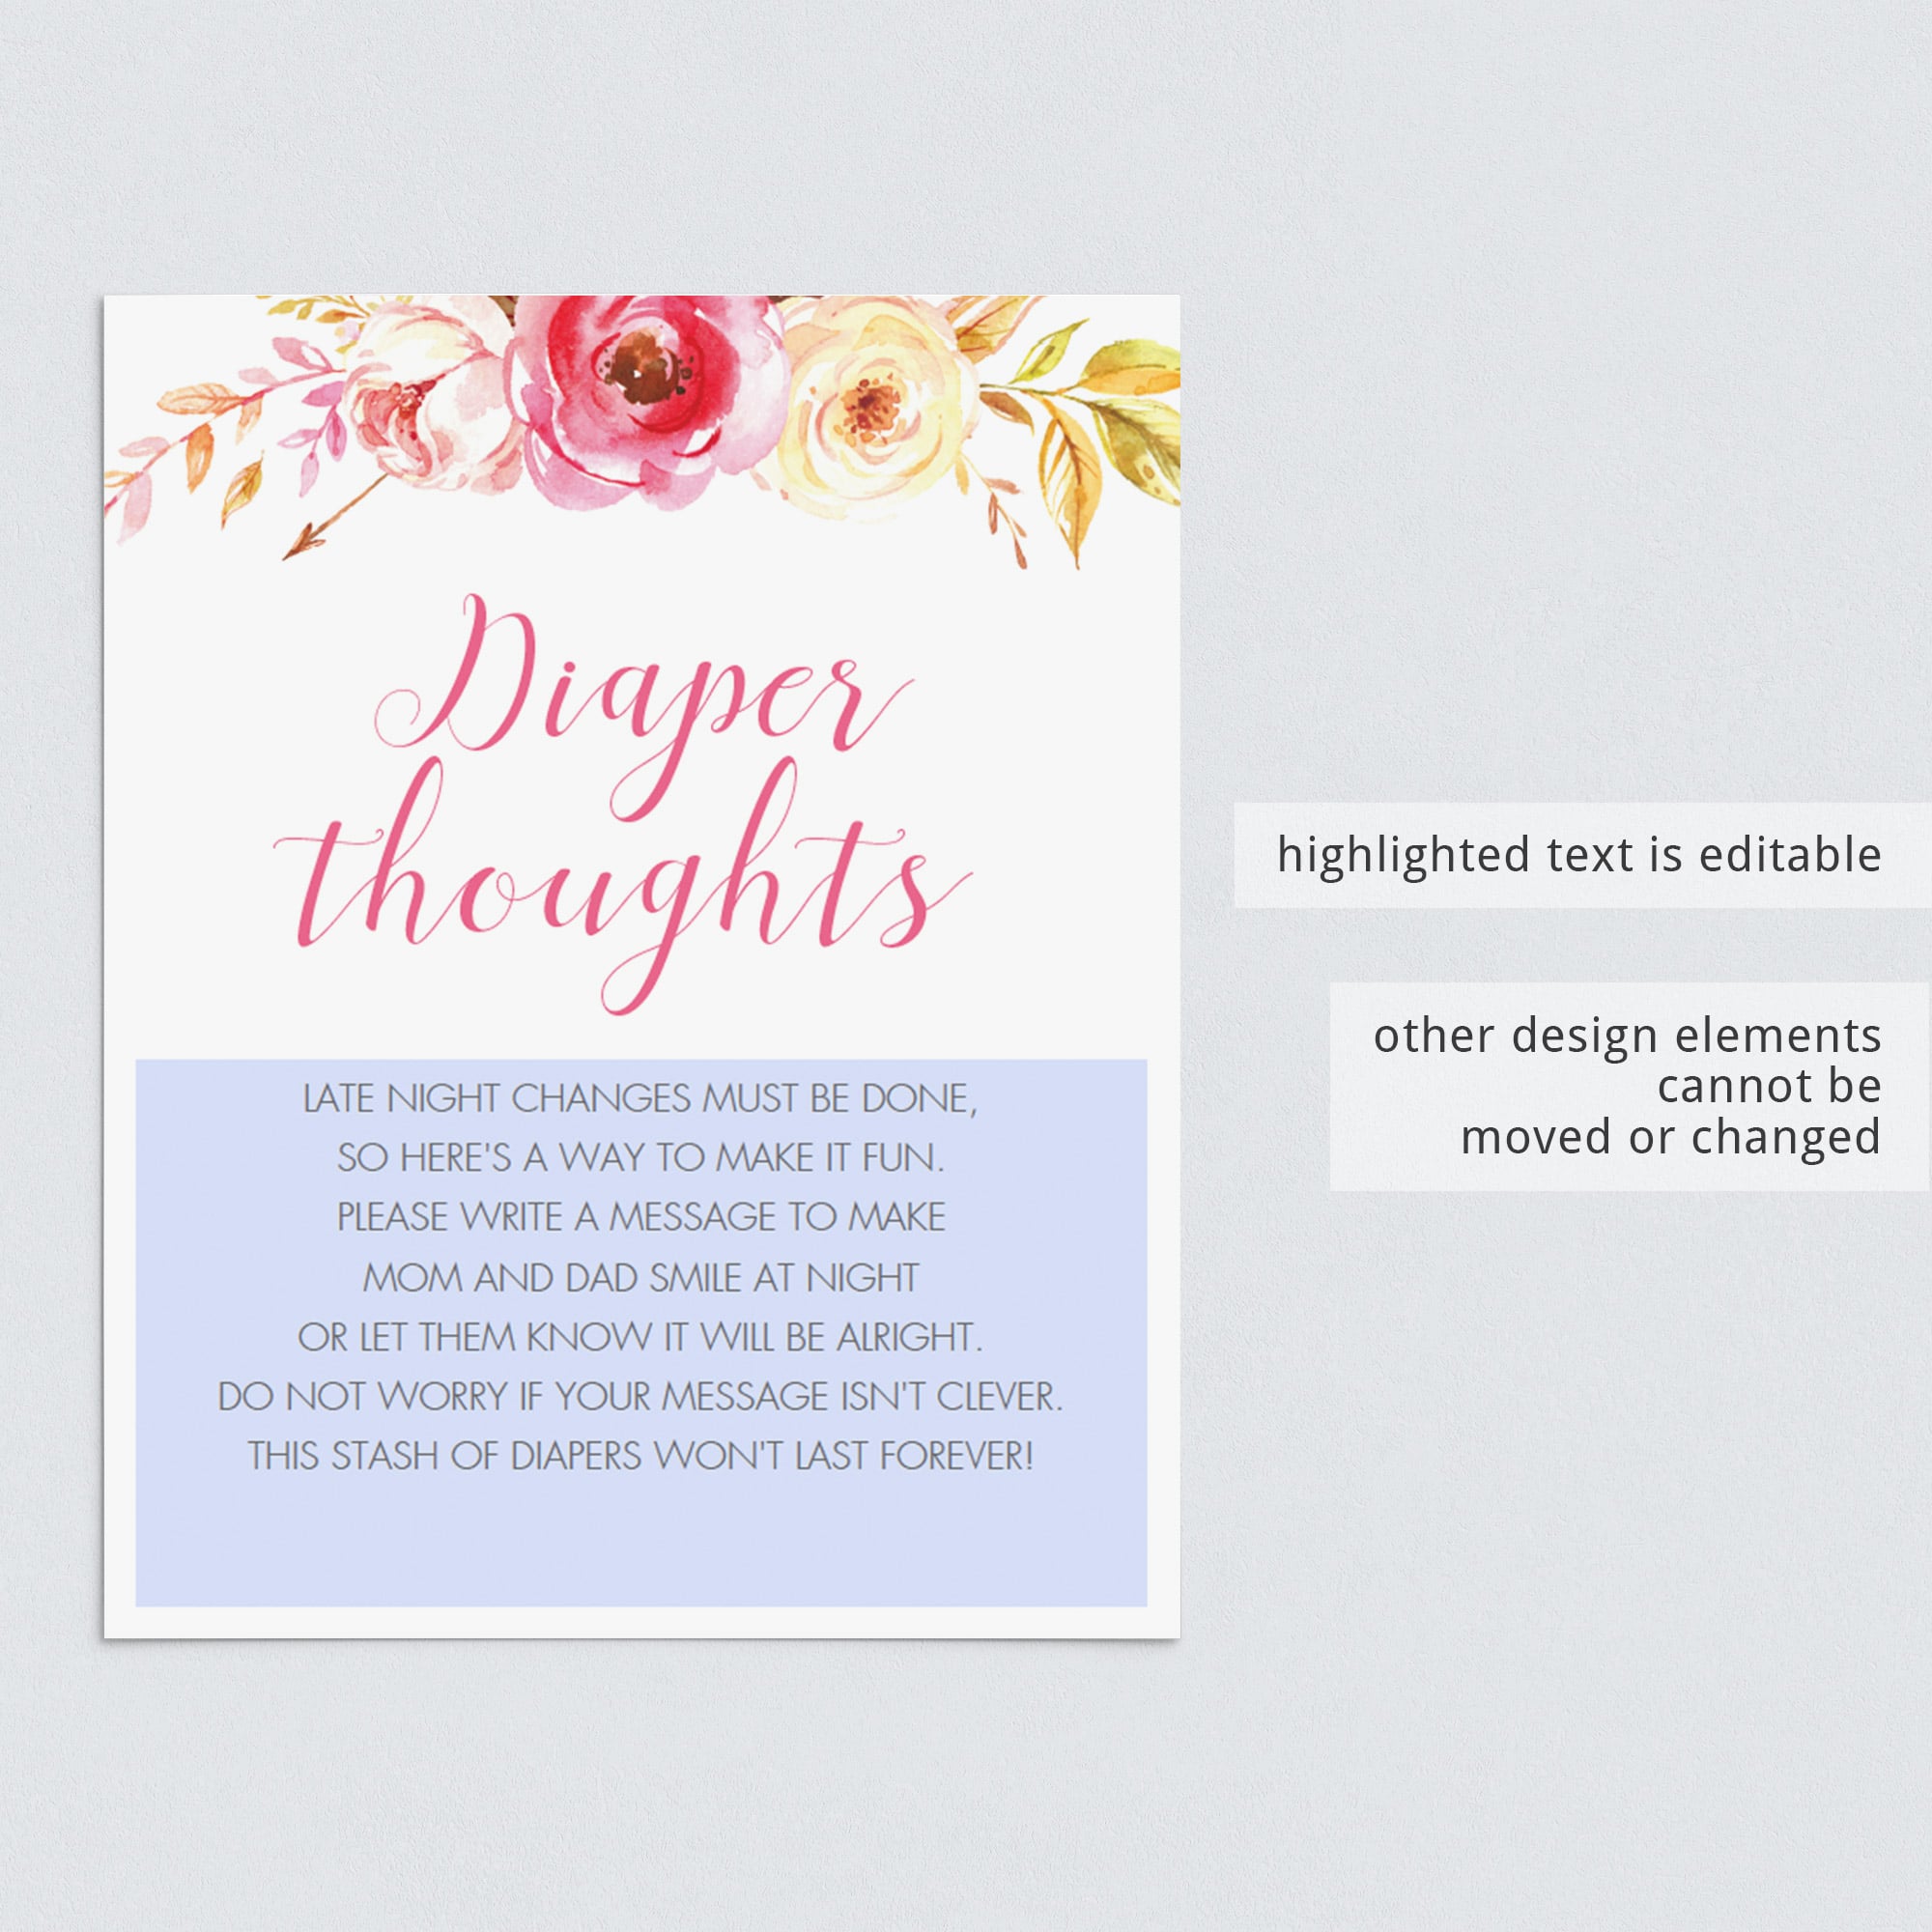 DIY diaper thoughts game for girl baby shower by LittleSizzle